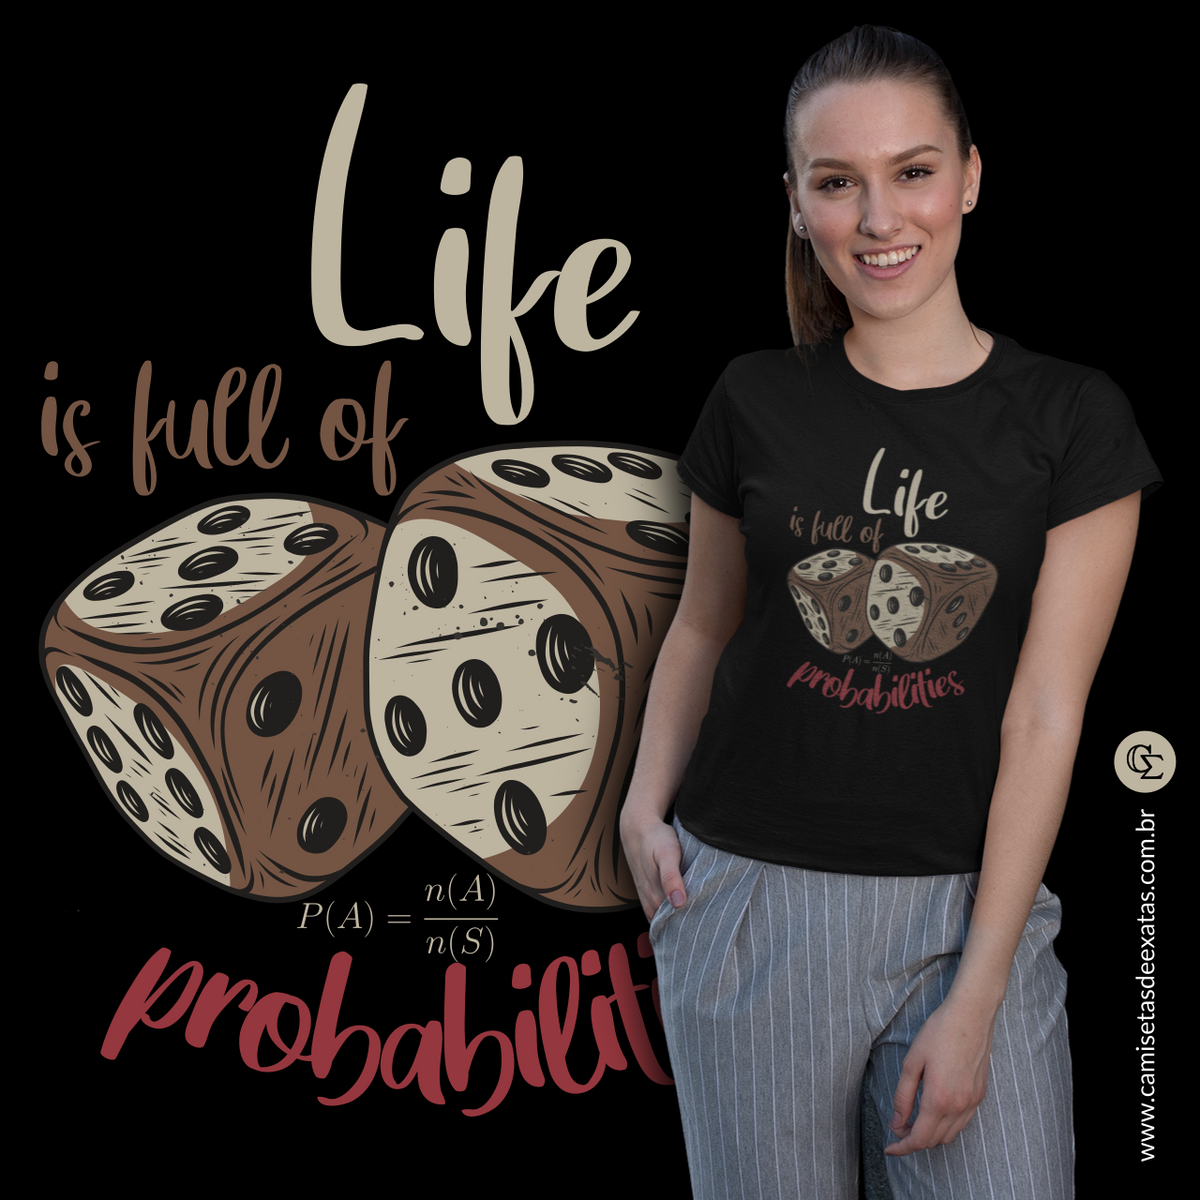 Nome do produto: LIFE IS FULL OF PROBABILITIES